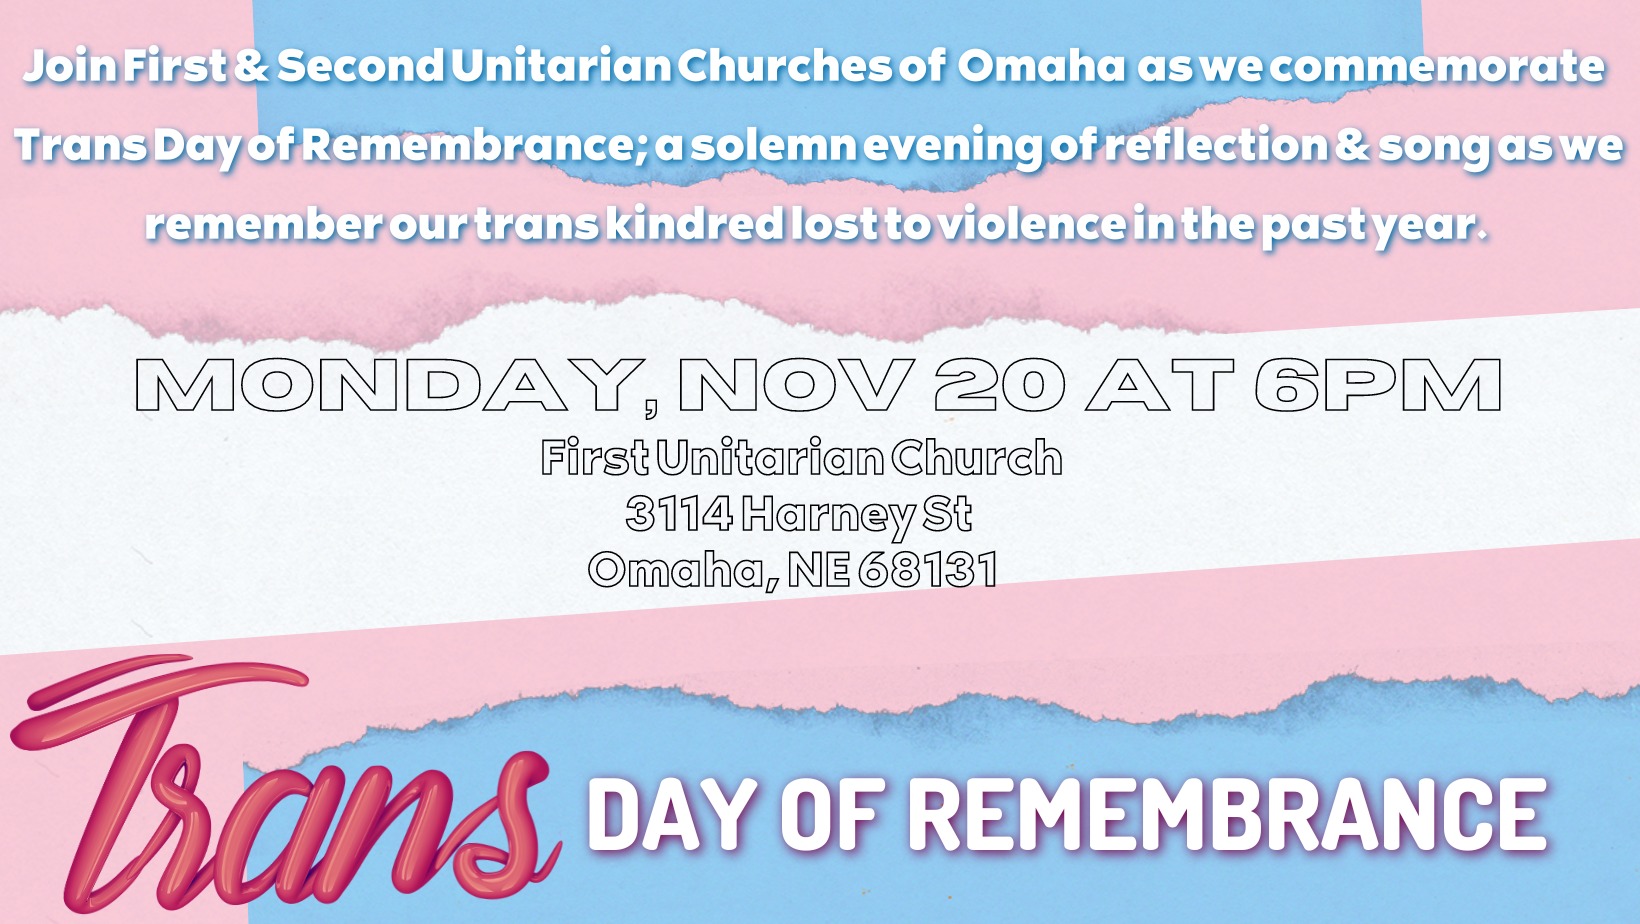 Join First & Second Unitarian Churches of Omaha as we commemorate Trans Day of Remembrance; a solemn evening of reflection & song as we remember our trans kindred lost to violence in the past year. MONDAY, NOV 20 AT 6PM First Unitarian Church 3114 Harney St Omaha, NE 68131 Trans Day of Remembrance